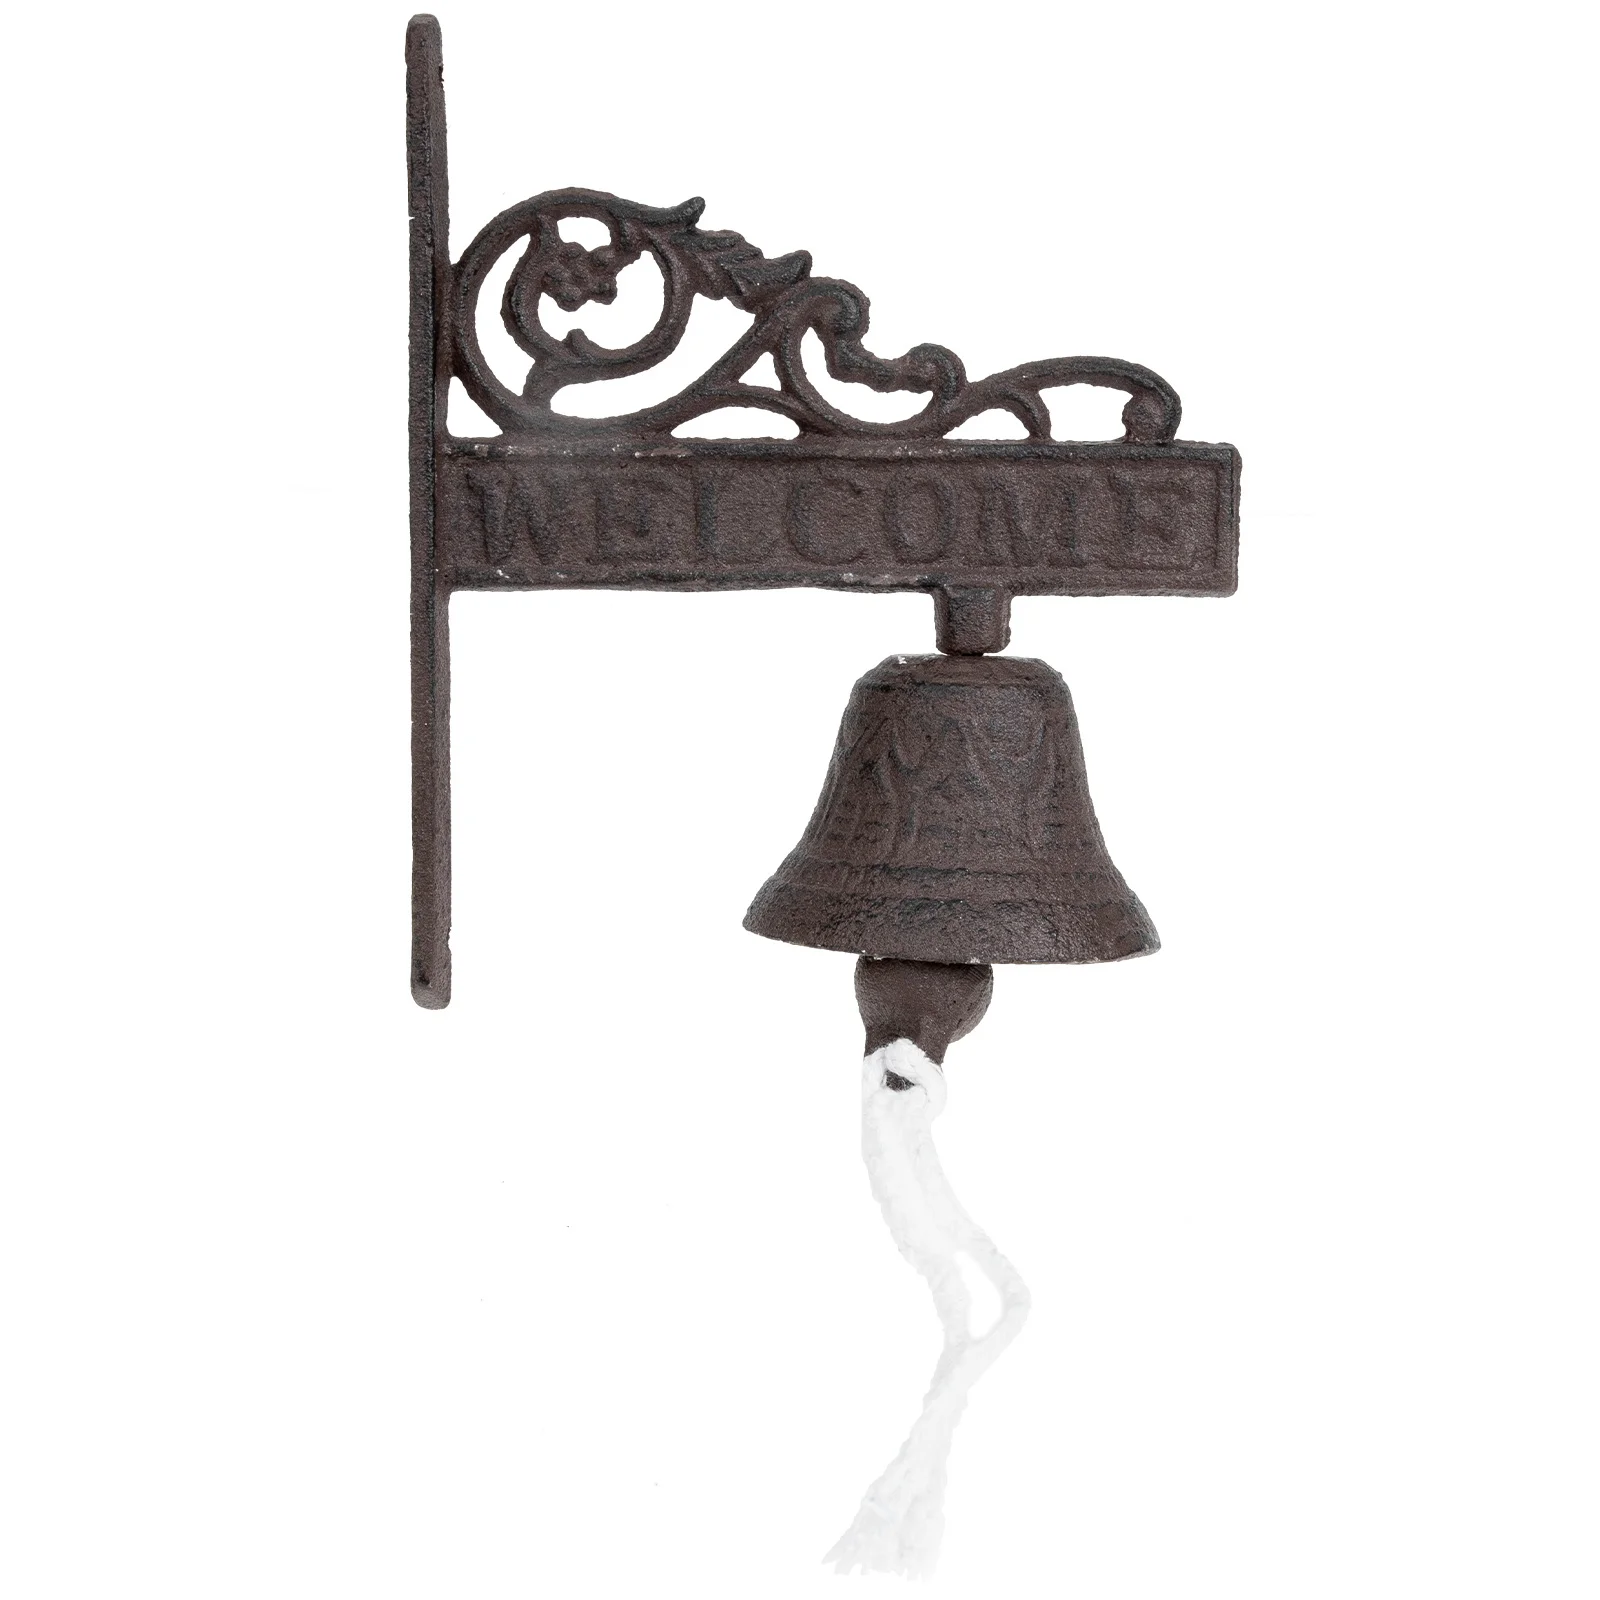 

Bell Doorbell Iron Wall Bells Hanging Door Dinner Parts Fence Link Chain Shaking Outdoor Farmhouse Cast Vintage Mounted Rustic